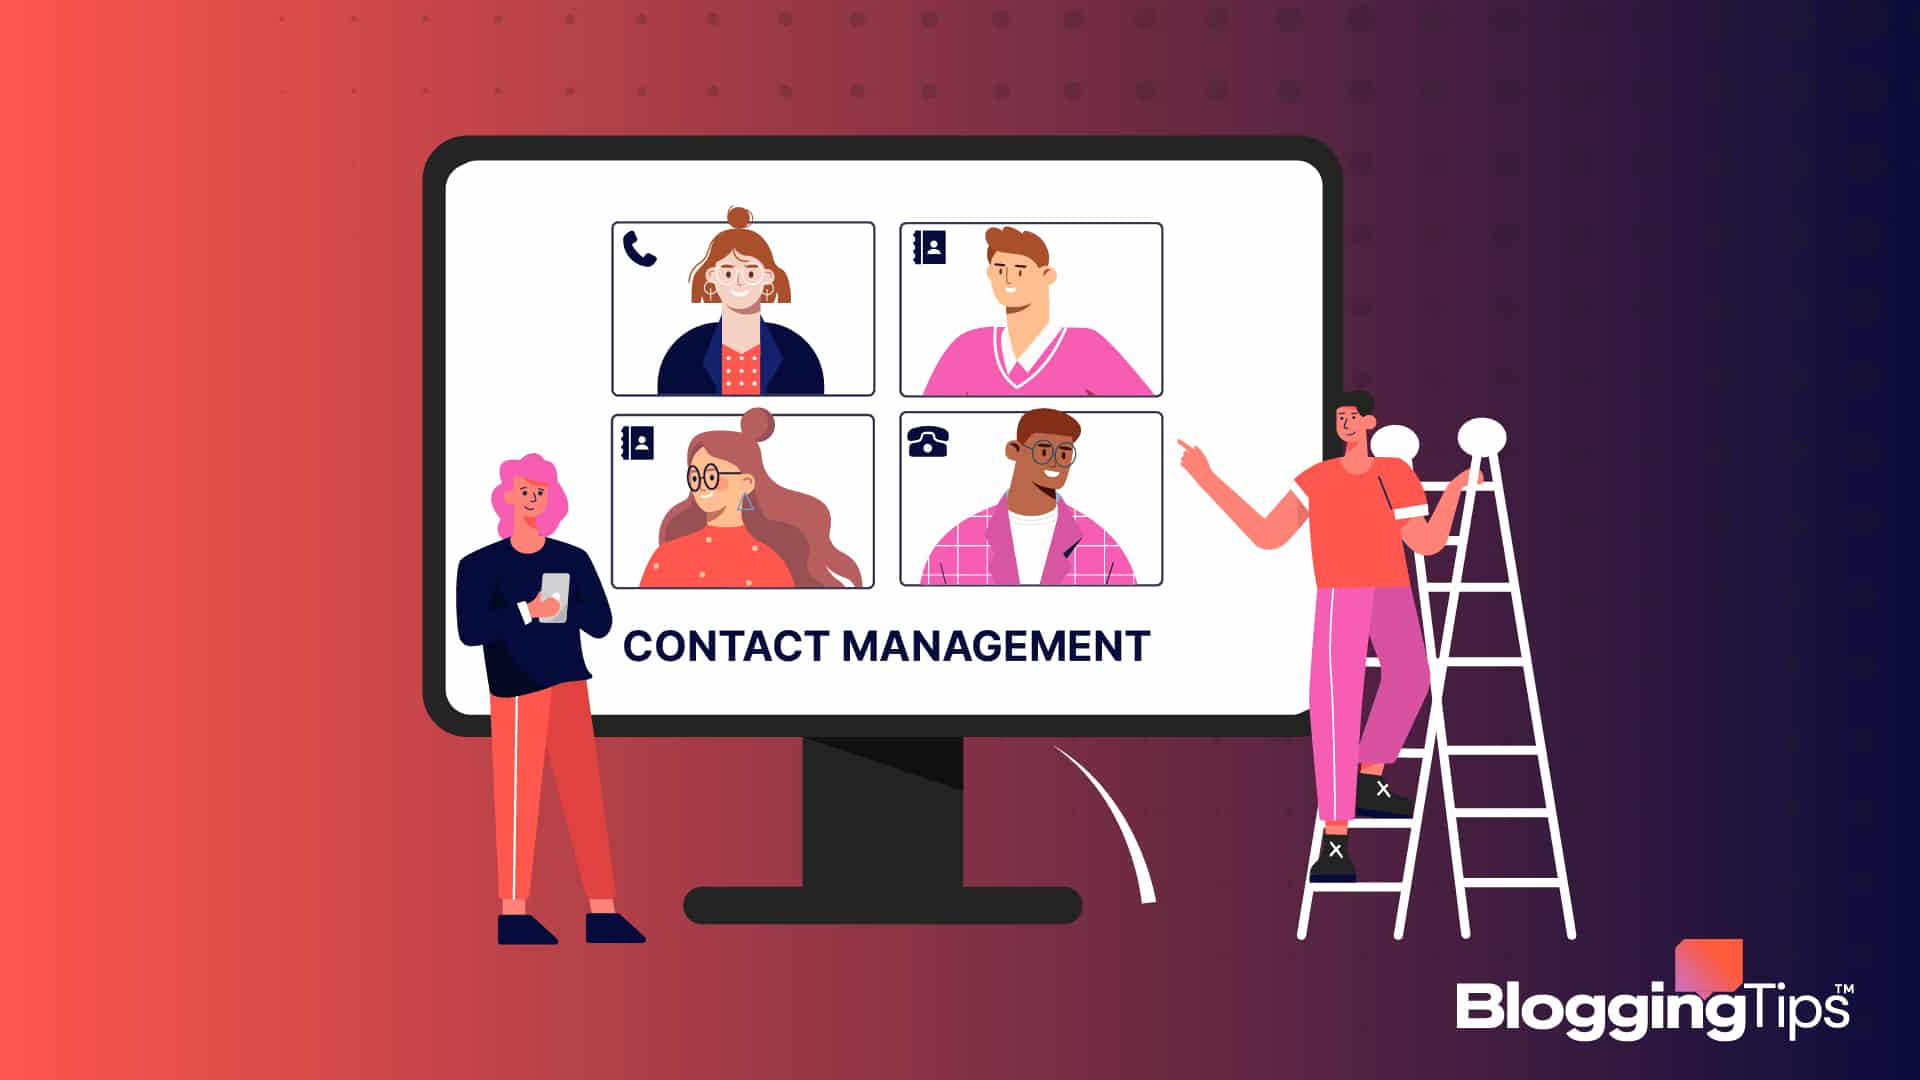 vector graphic showing an illustration of people learning how to use contact management software